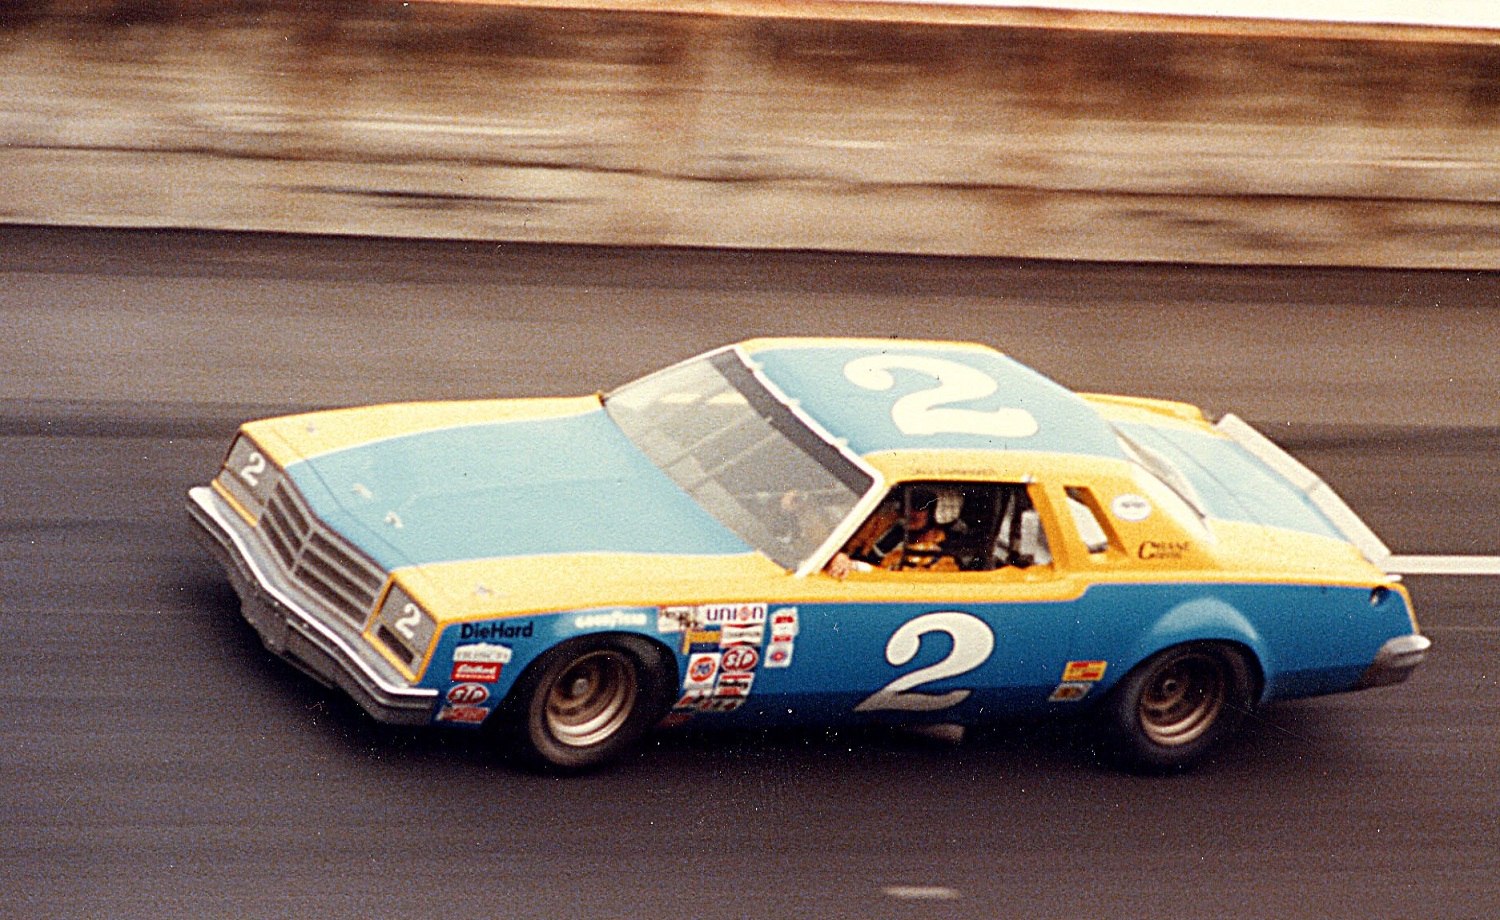 Dale Earnhardt drives to an eighth-place finish in the 1979 Daytona 500 in an unsponsored Rod Osterlund car. The crew chief was the legendary "Suitcase" Jake Elder.